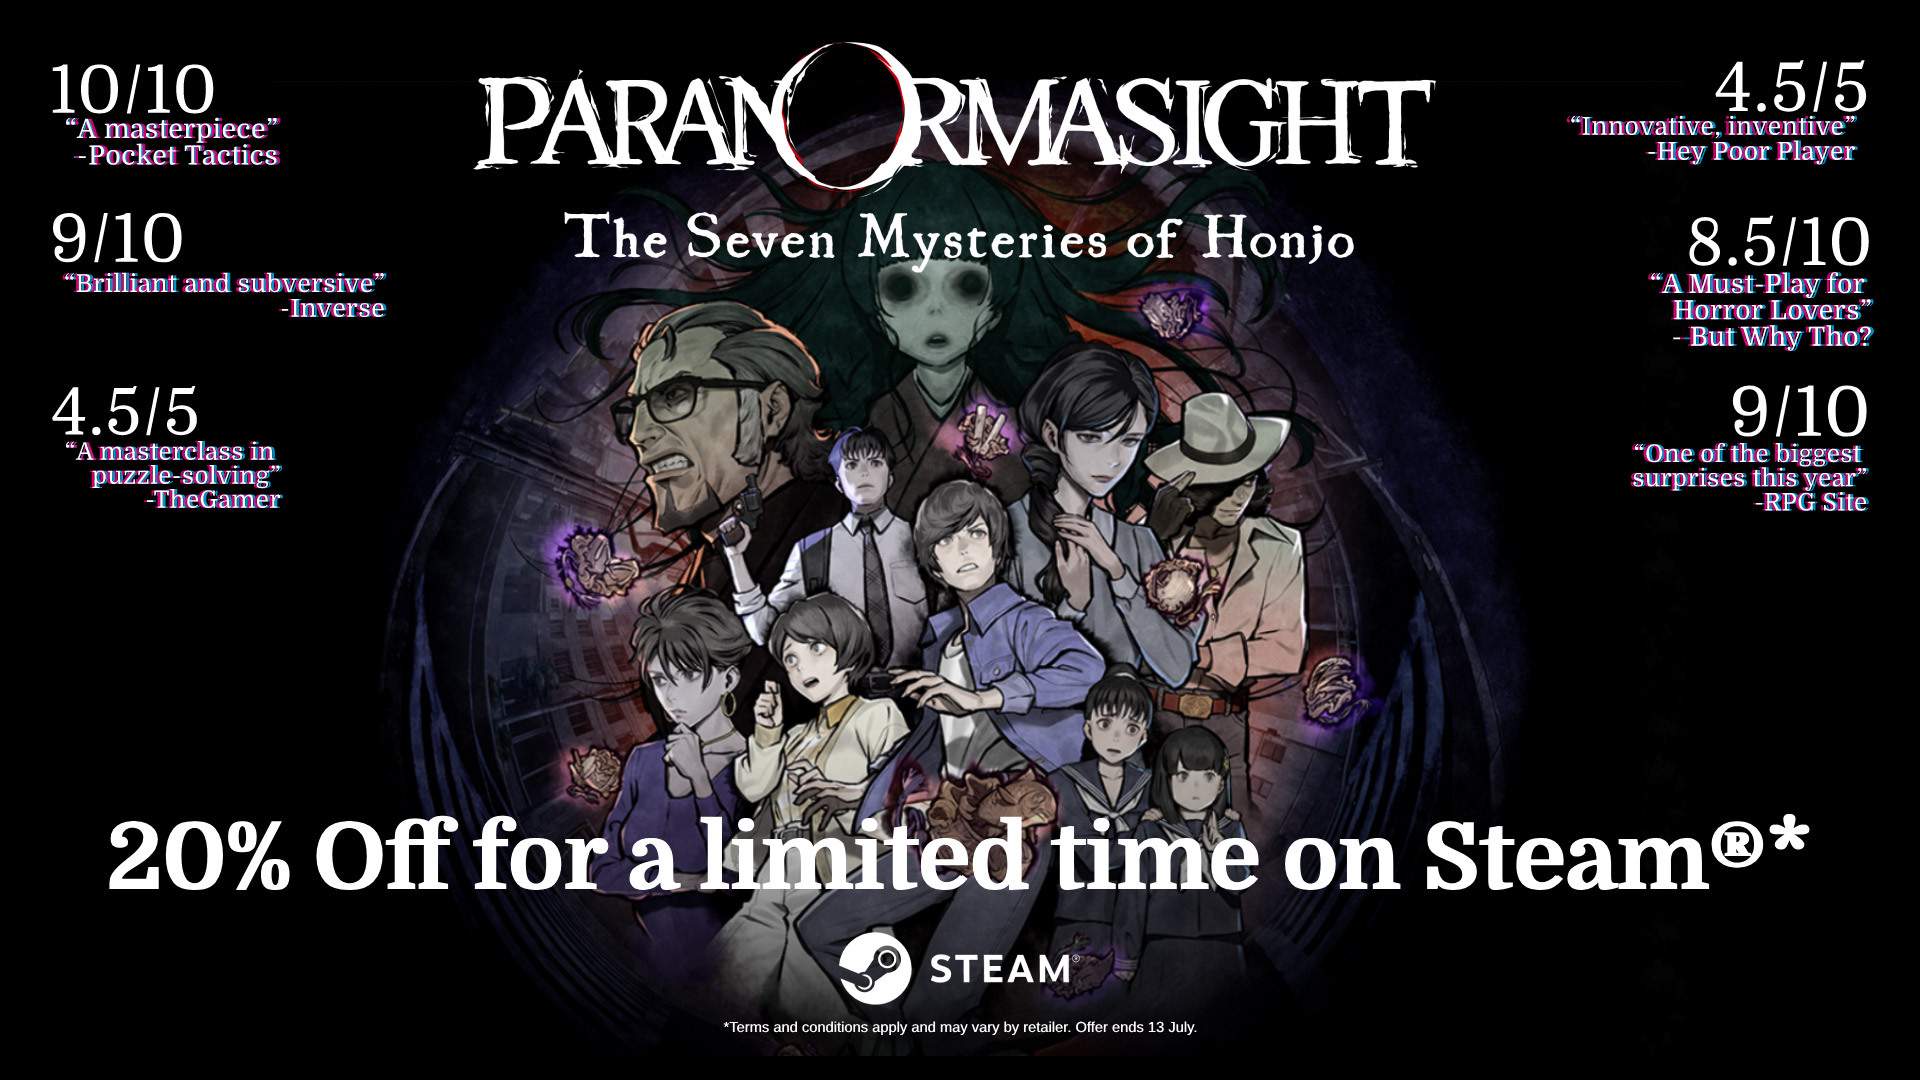 PARANORMASIGHT characters overlooked by a haunting, ghost. Now 20% off for a limited time on Steam.